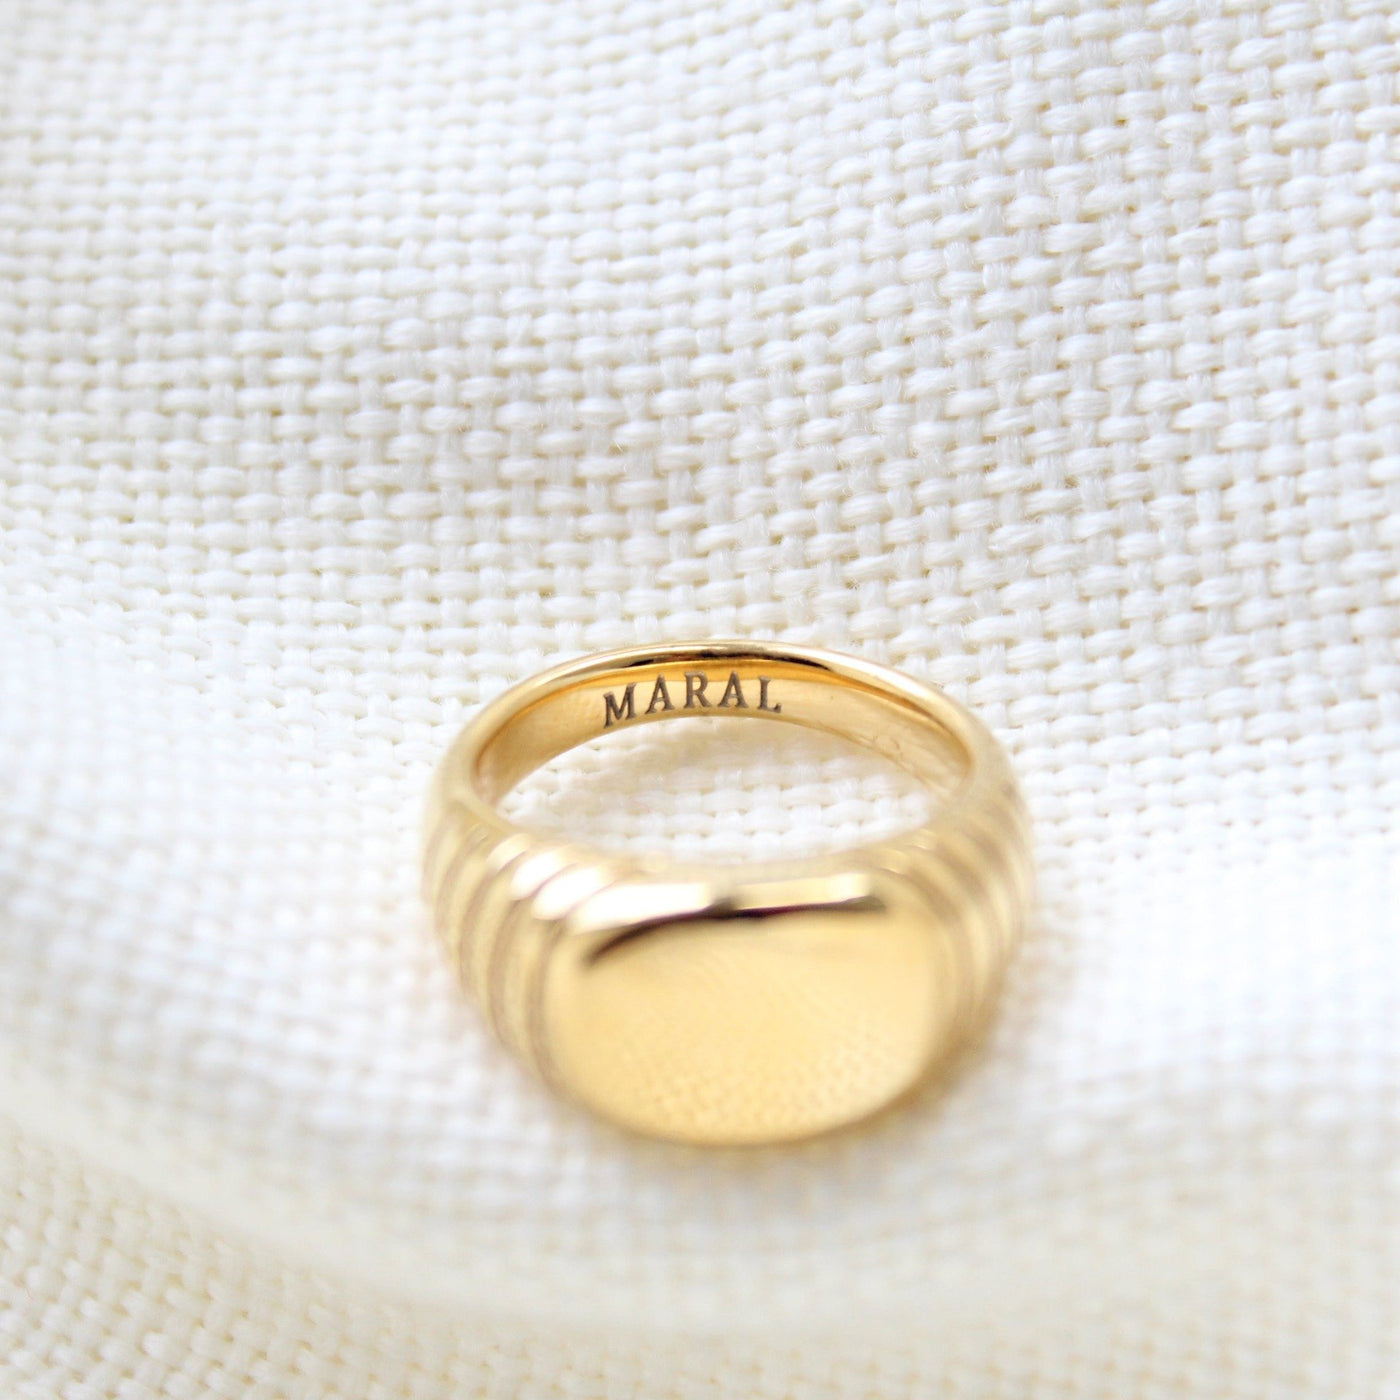 New Signet Ring in Yellow Gold - Maral Kunst Jewelry